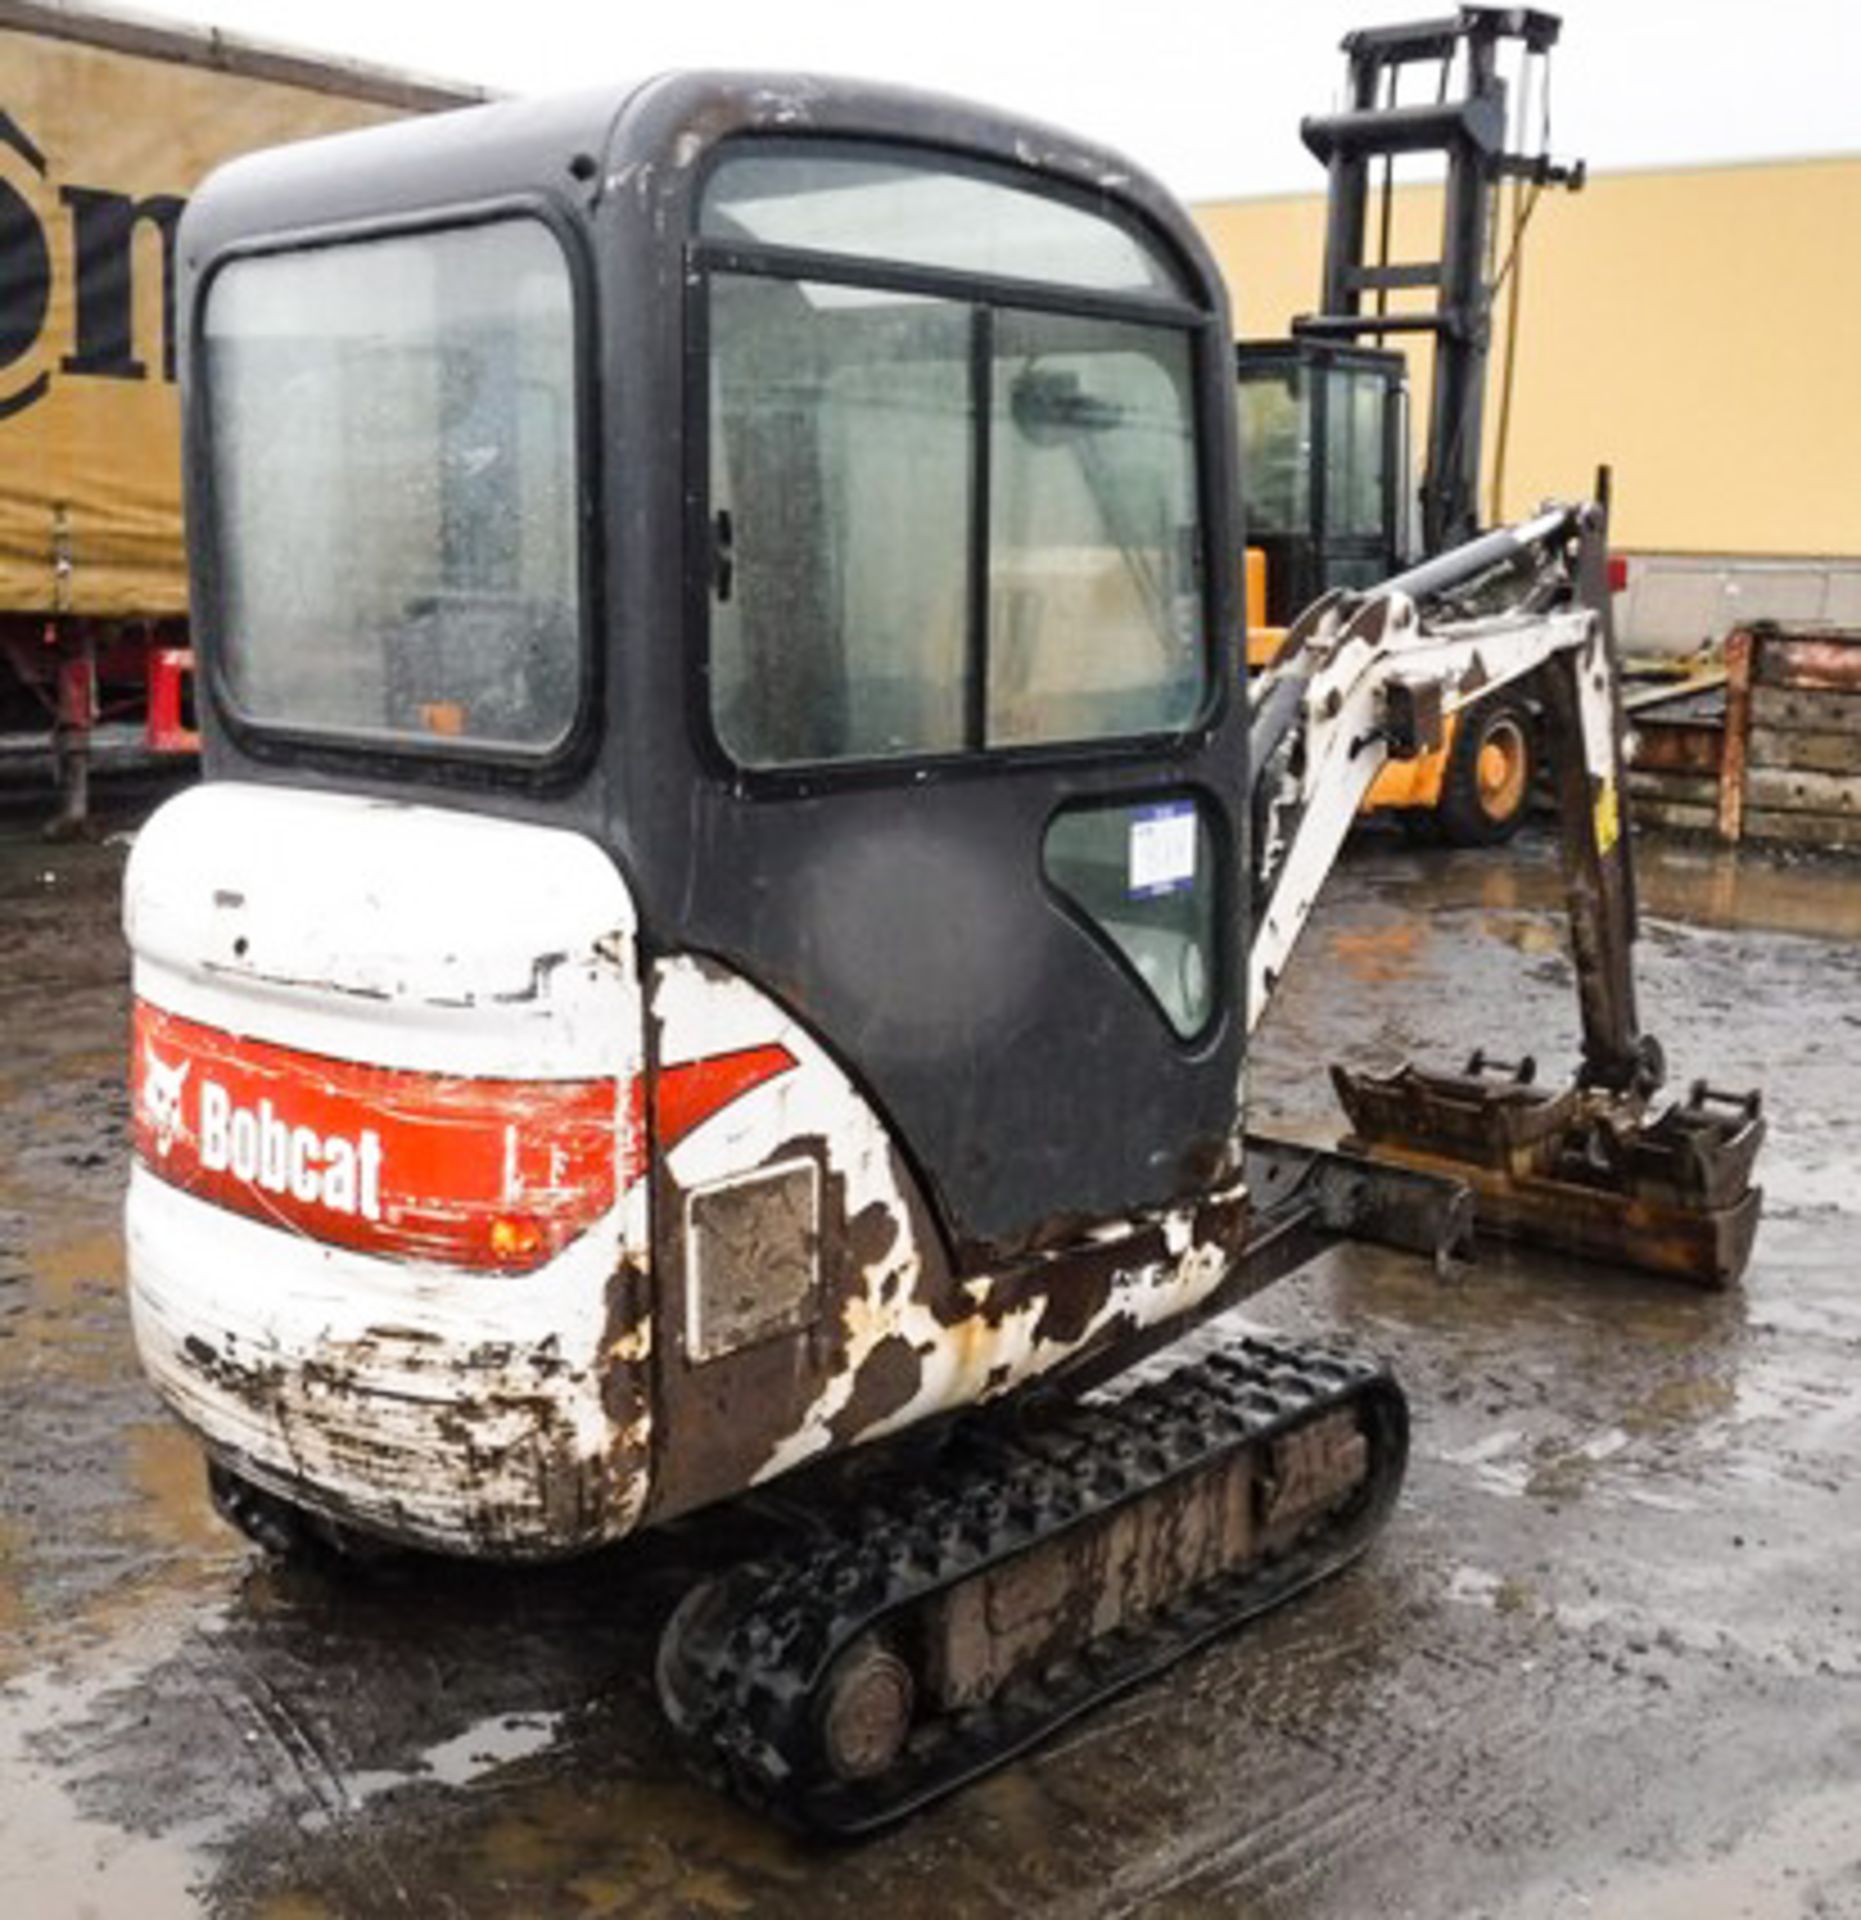 2011 BOBCAT E16, S/N AHLL11016, 2101HRS (NOT VERIFIED), 3 BUCKETS, OPERATING WEIGHT 1.6T - Image 11 of 15